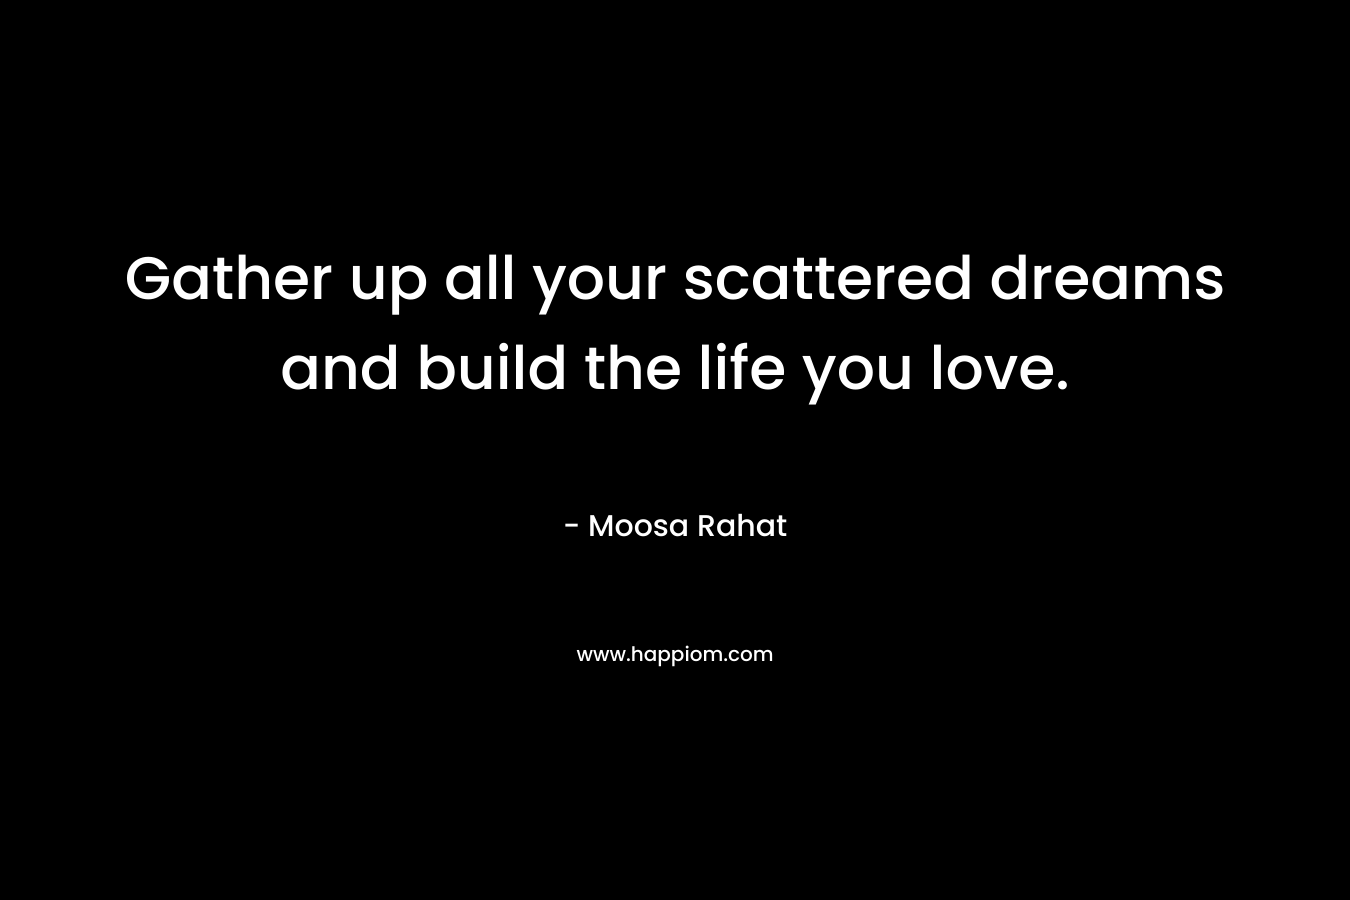 Gather up all your scattered dreams and build the life you love. – Moosa Rahat